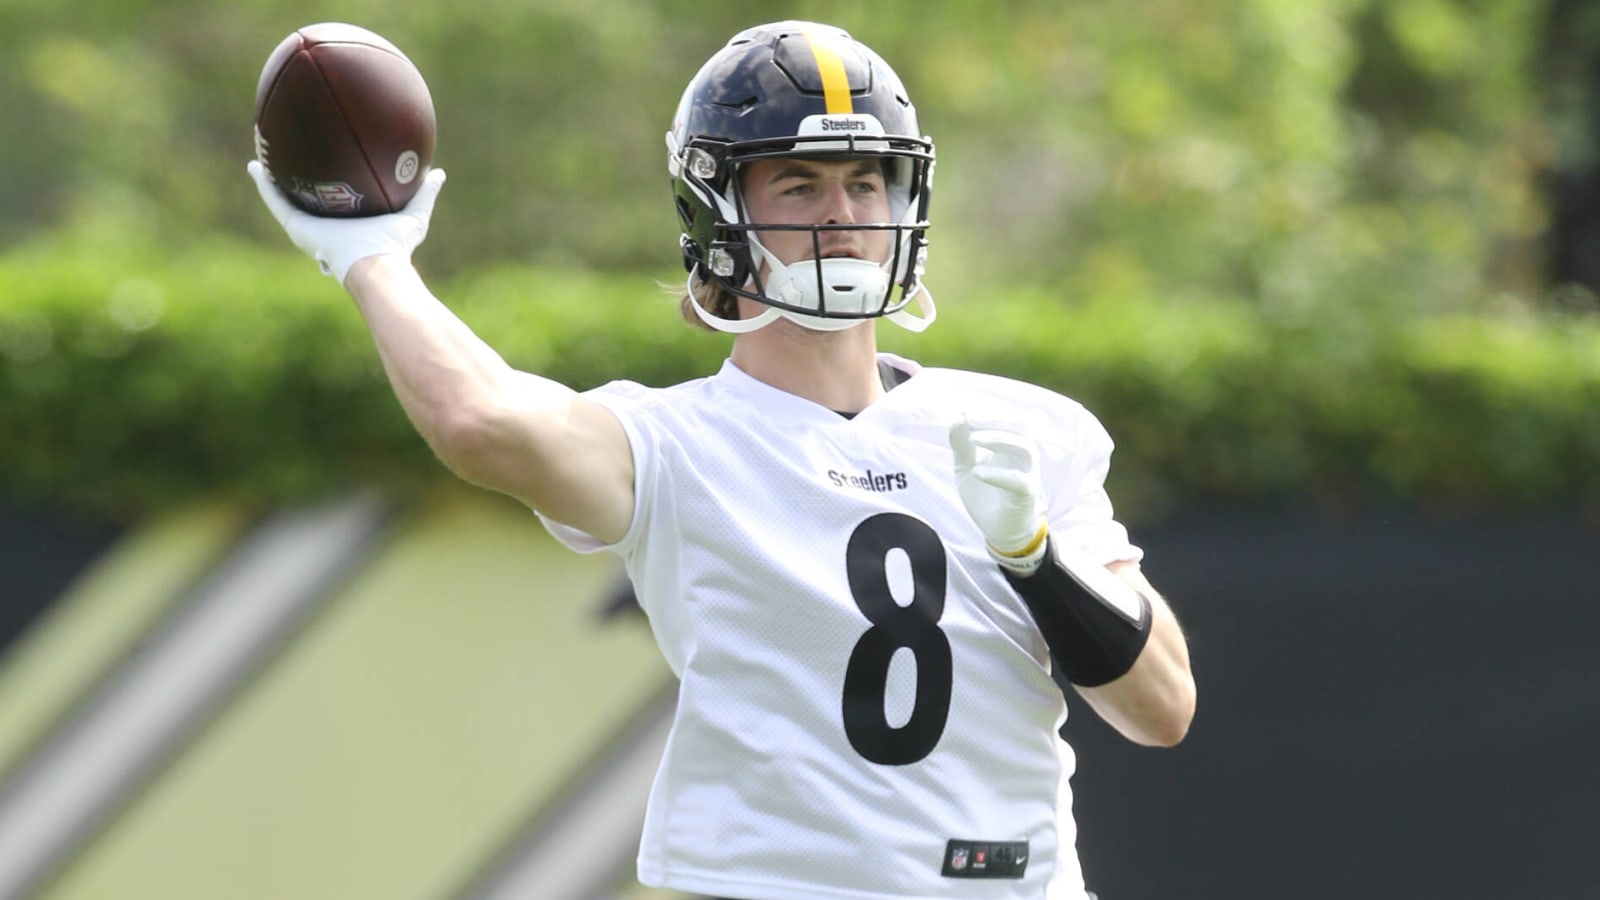 QB named 'biggest weakness' for 2022 Steelers